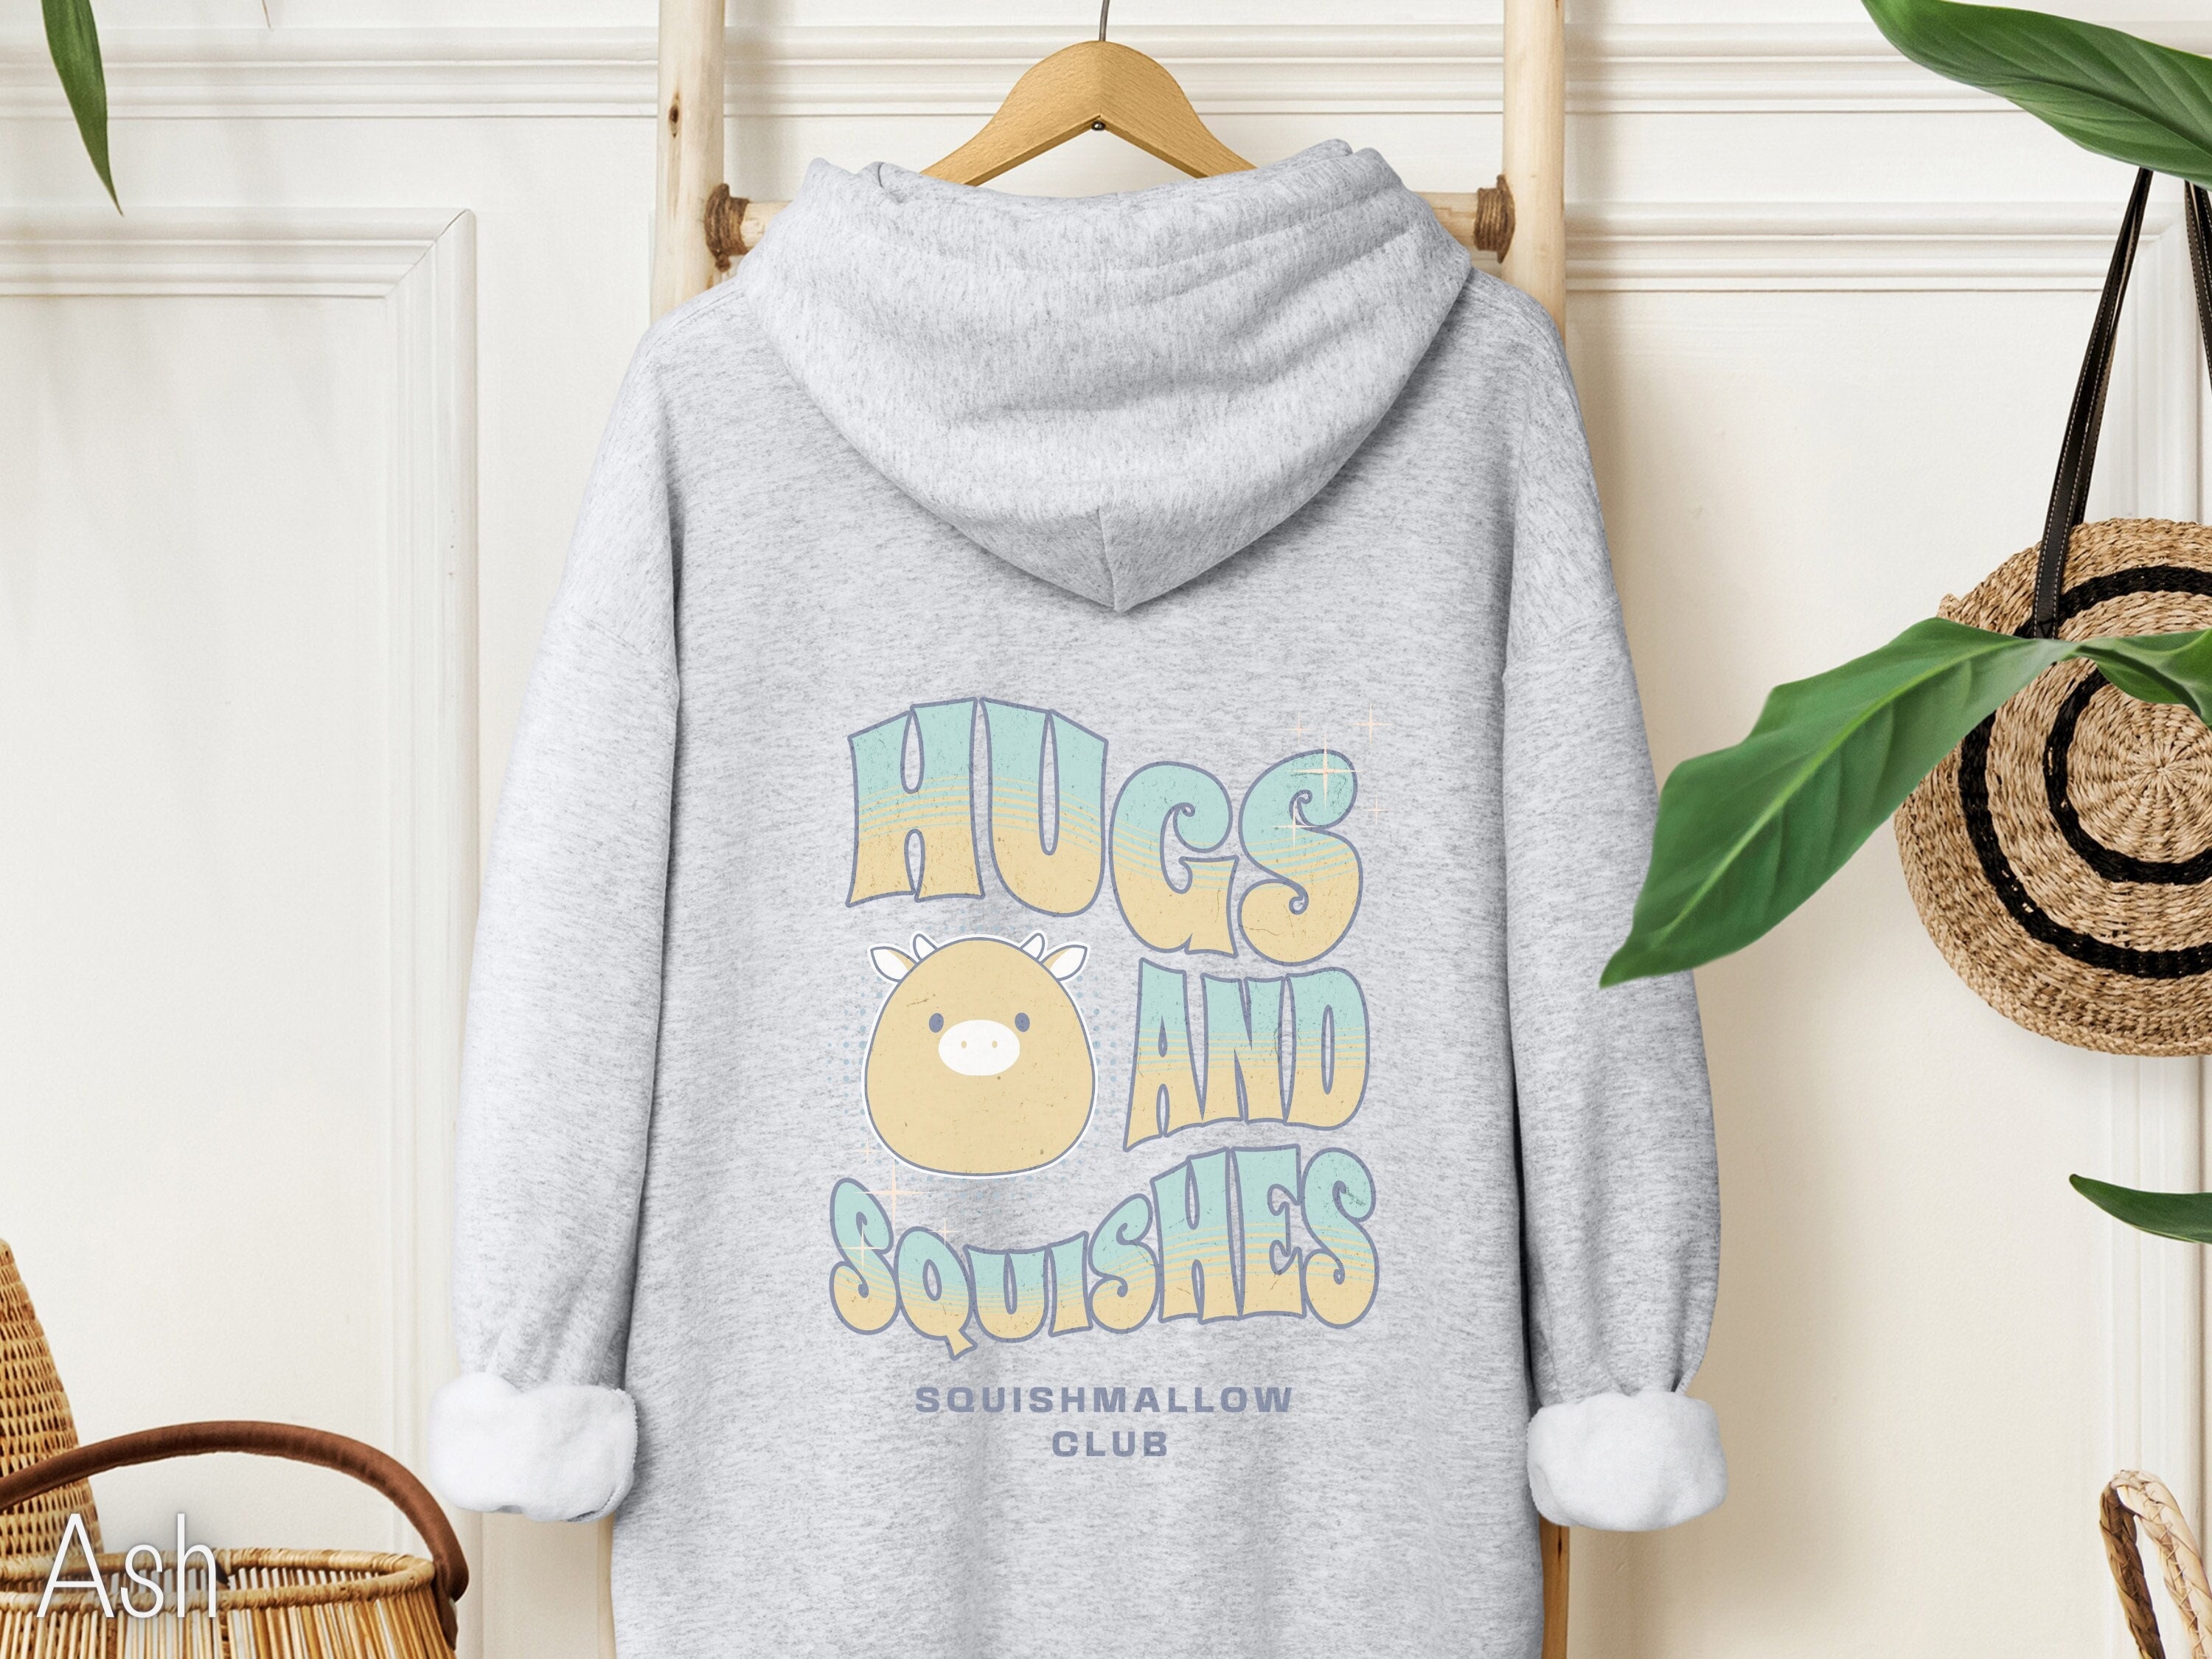 Squiggles & Squishes – nippie